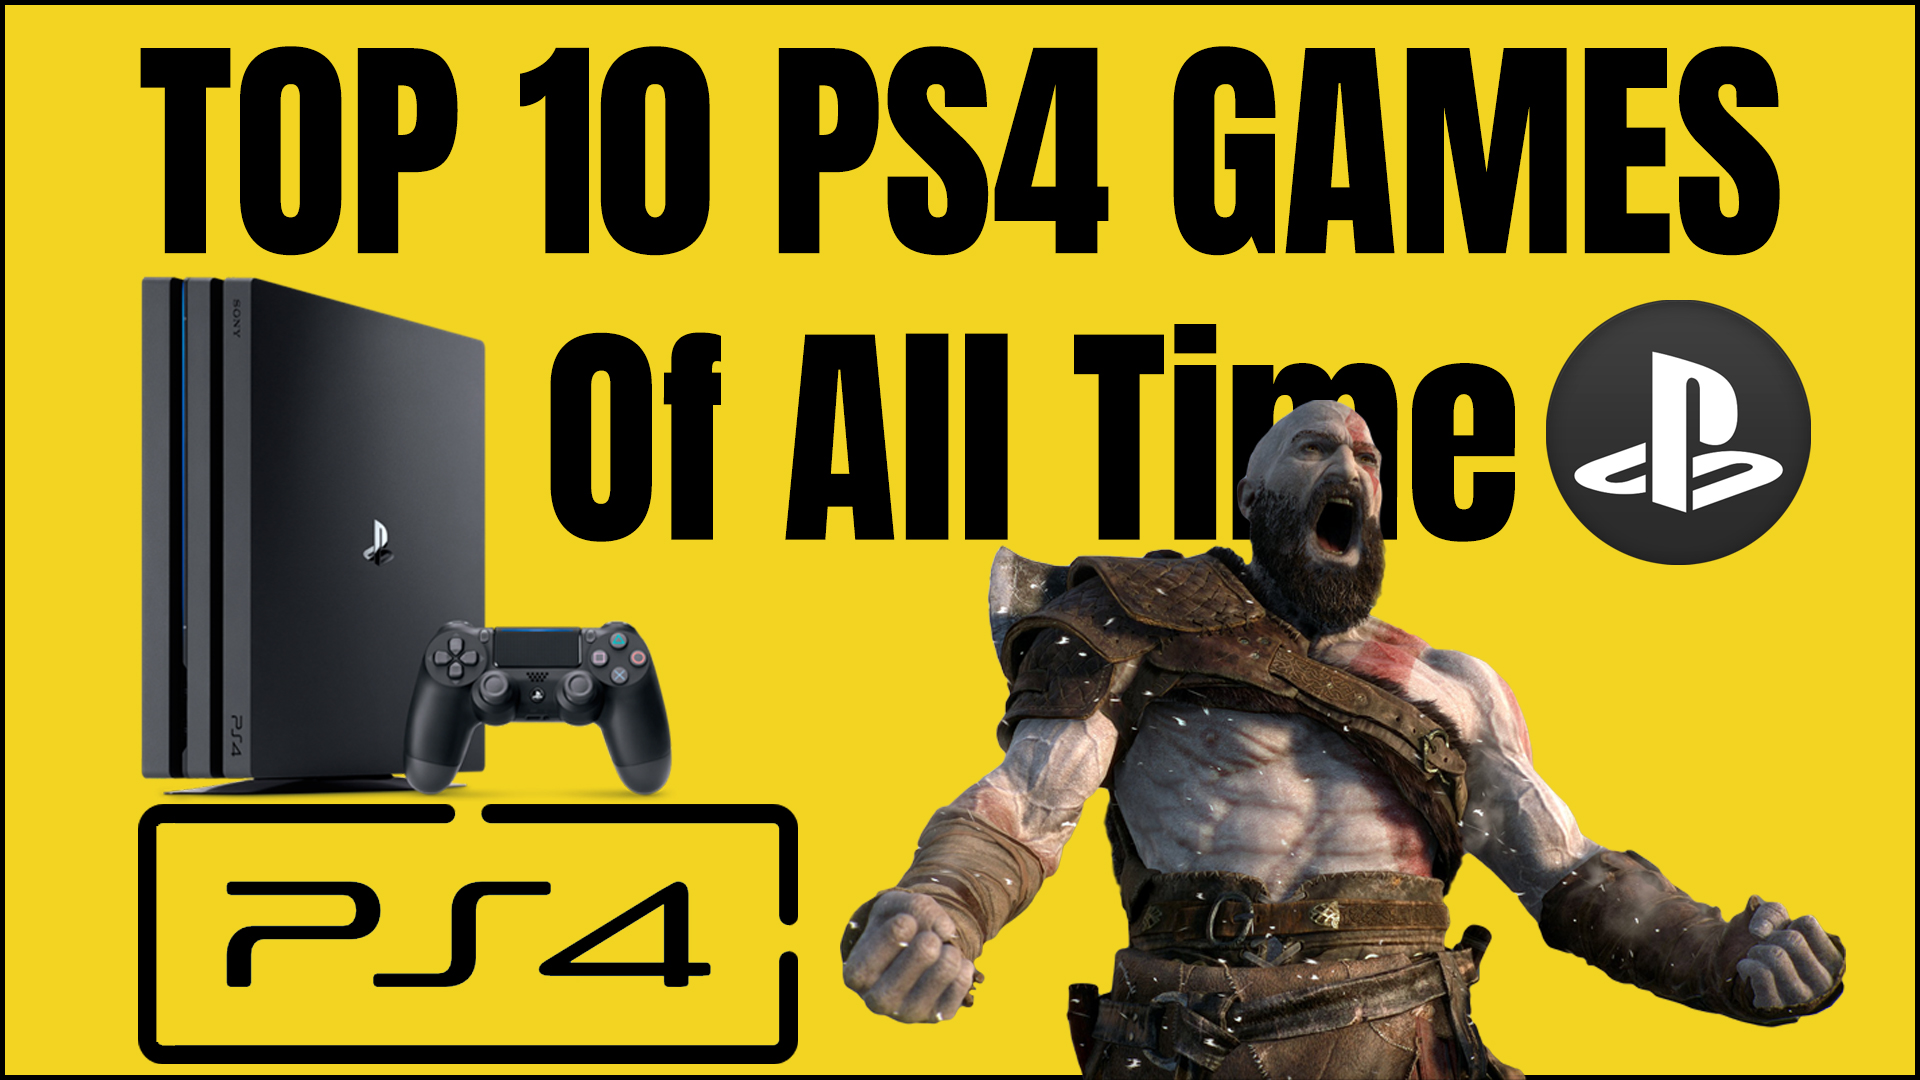 Top 10 PS4 Games of All Time